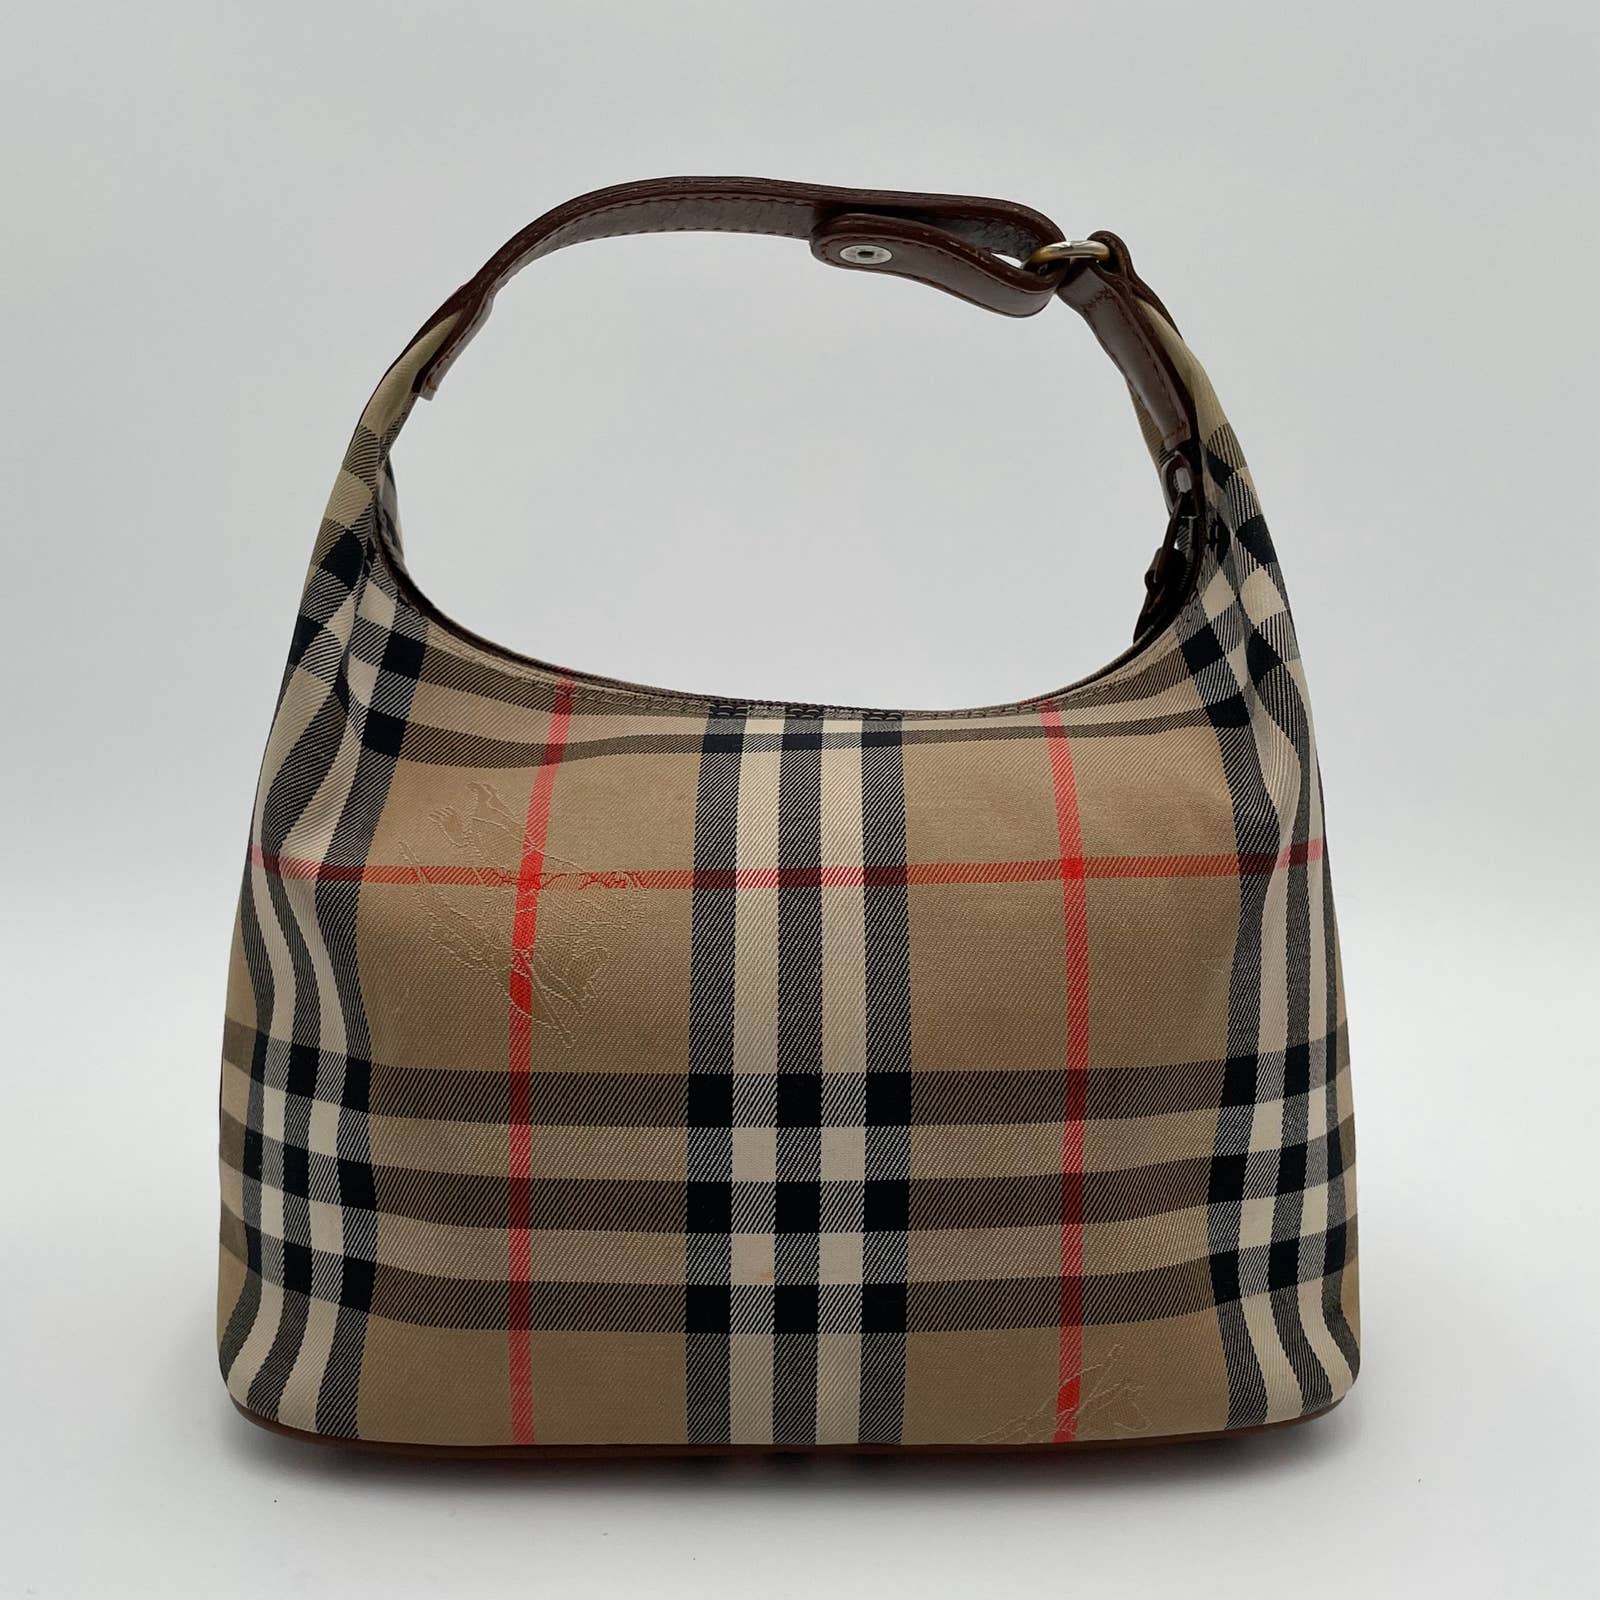 A small handbag with a beige, black, and red checkered pattern resembling the Burberry Vintage House Check Bag. Featuring a short brown strap, canvas with leather trim, and a zip top. The bag has a curved, structured shape and is displayed against a plain white background by Burberry.